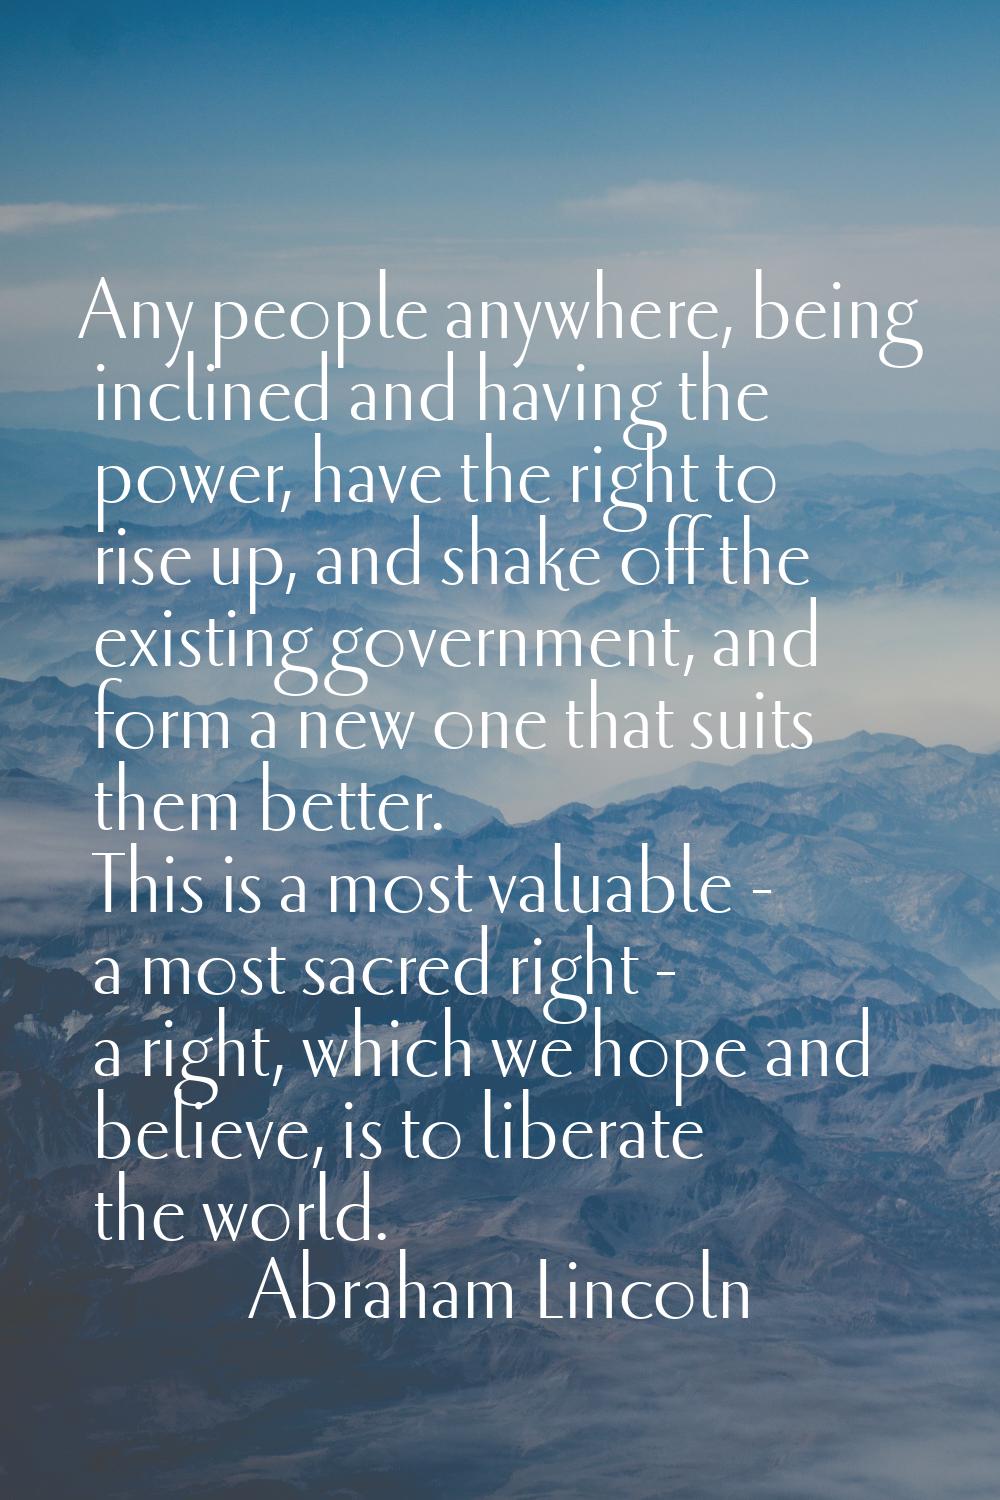 Any people anywhere, being inclined and having the power, have the right to rise up, and shake off 